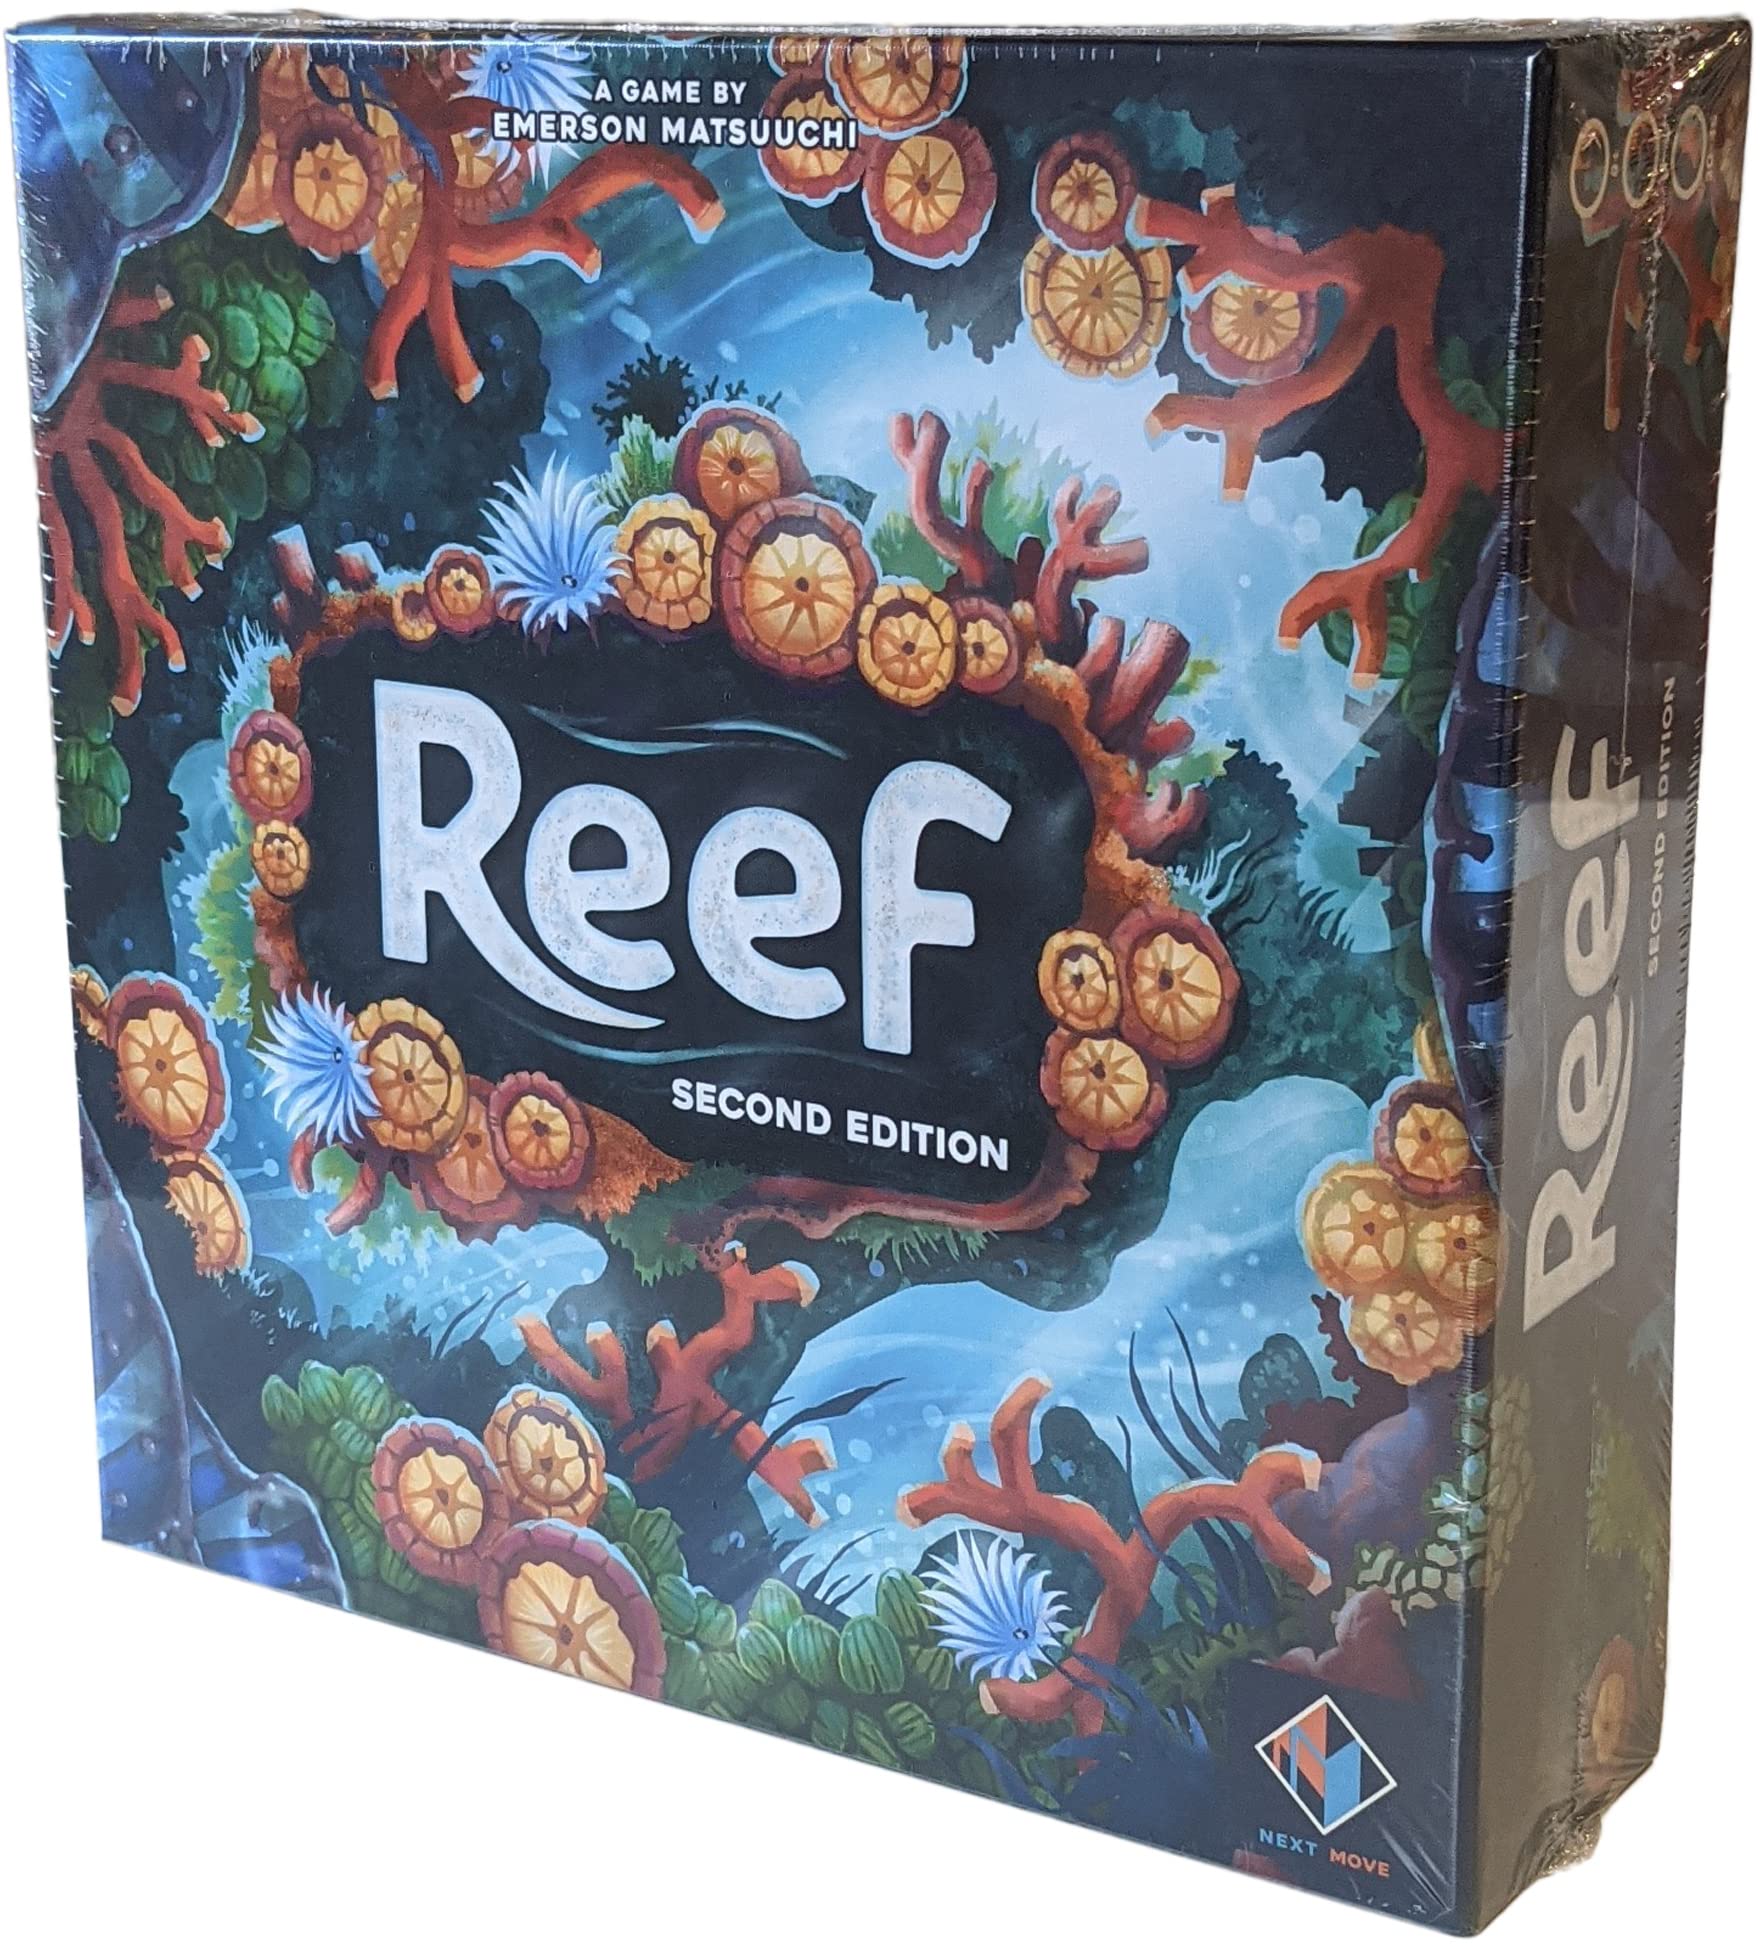 Reef Board Game (Second Edition) | Strategy Board Game | Family Board Game for Adults and Kids | Ages 8 and up | 2 to 4 Players | Average Playtime 30 - 45 Minutes | Made by Next Move Games